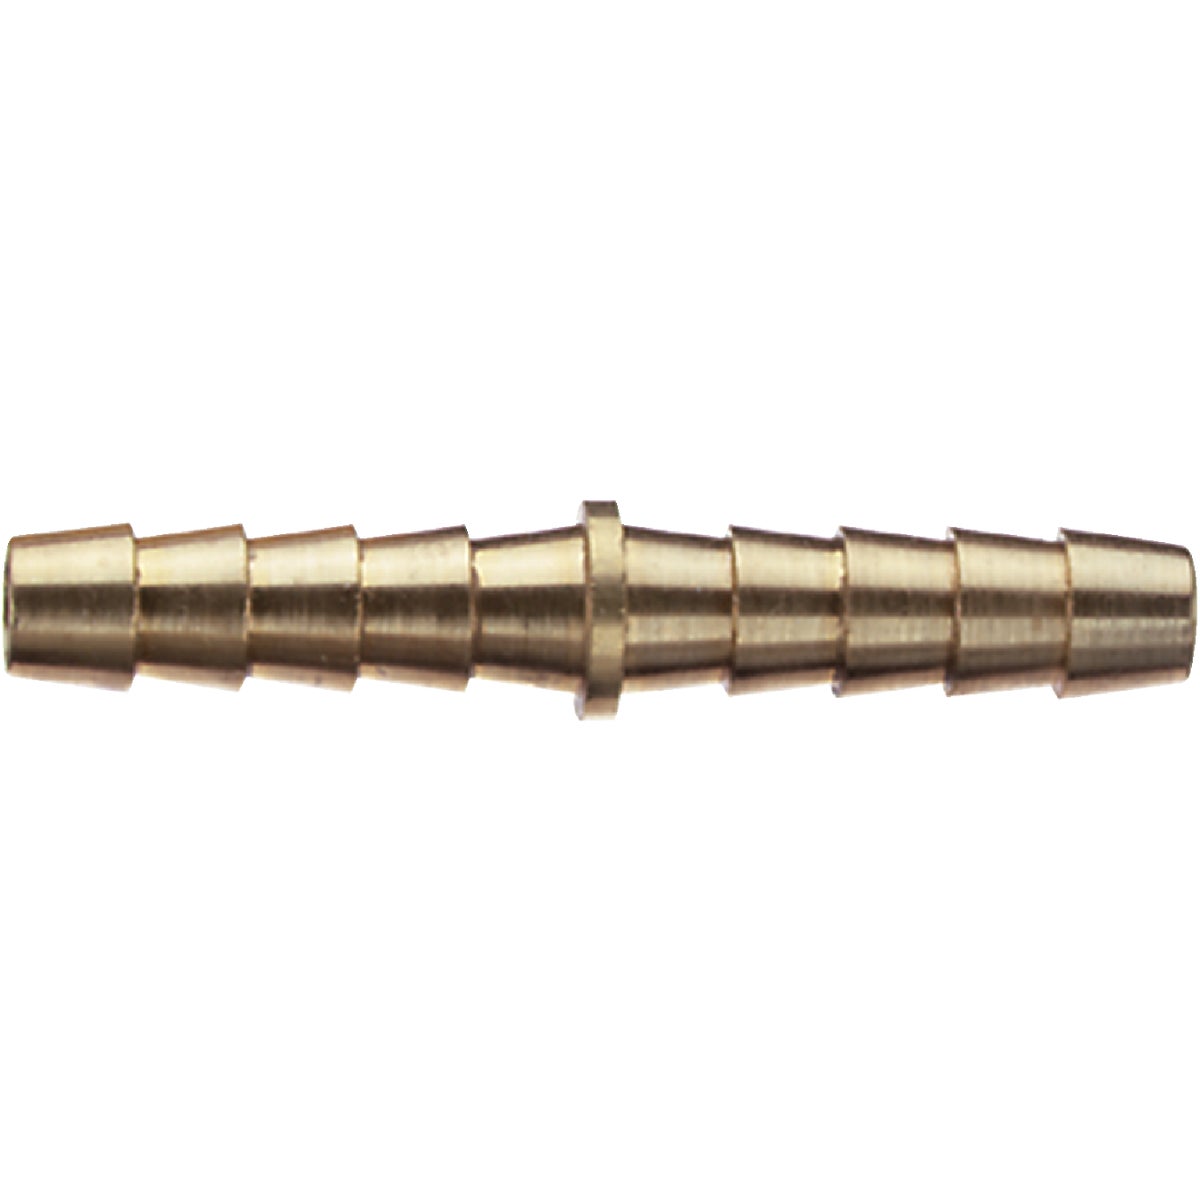 Item 578908, Splicer has a Barb type hose and is precision machined to high quality 